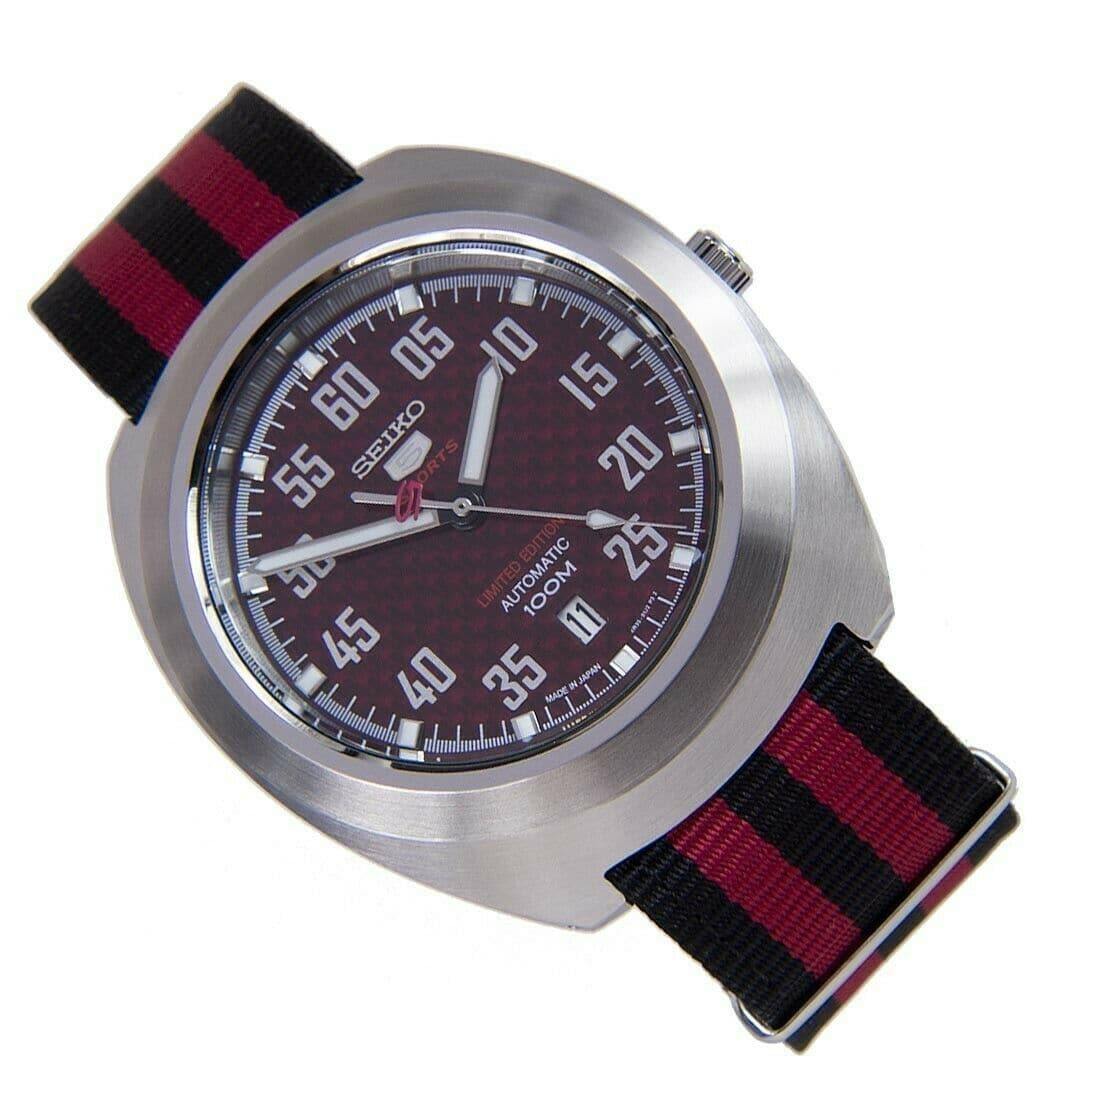 Seiko 5 Sports Japan Made Limited Edition Red Carbon Fiber Dial Helmet Turtle Watch SRPA87J1 - Prestige